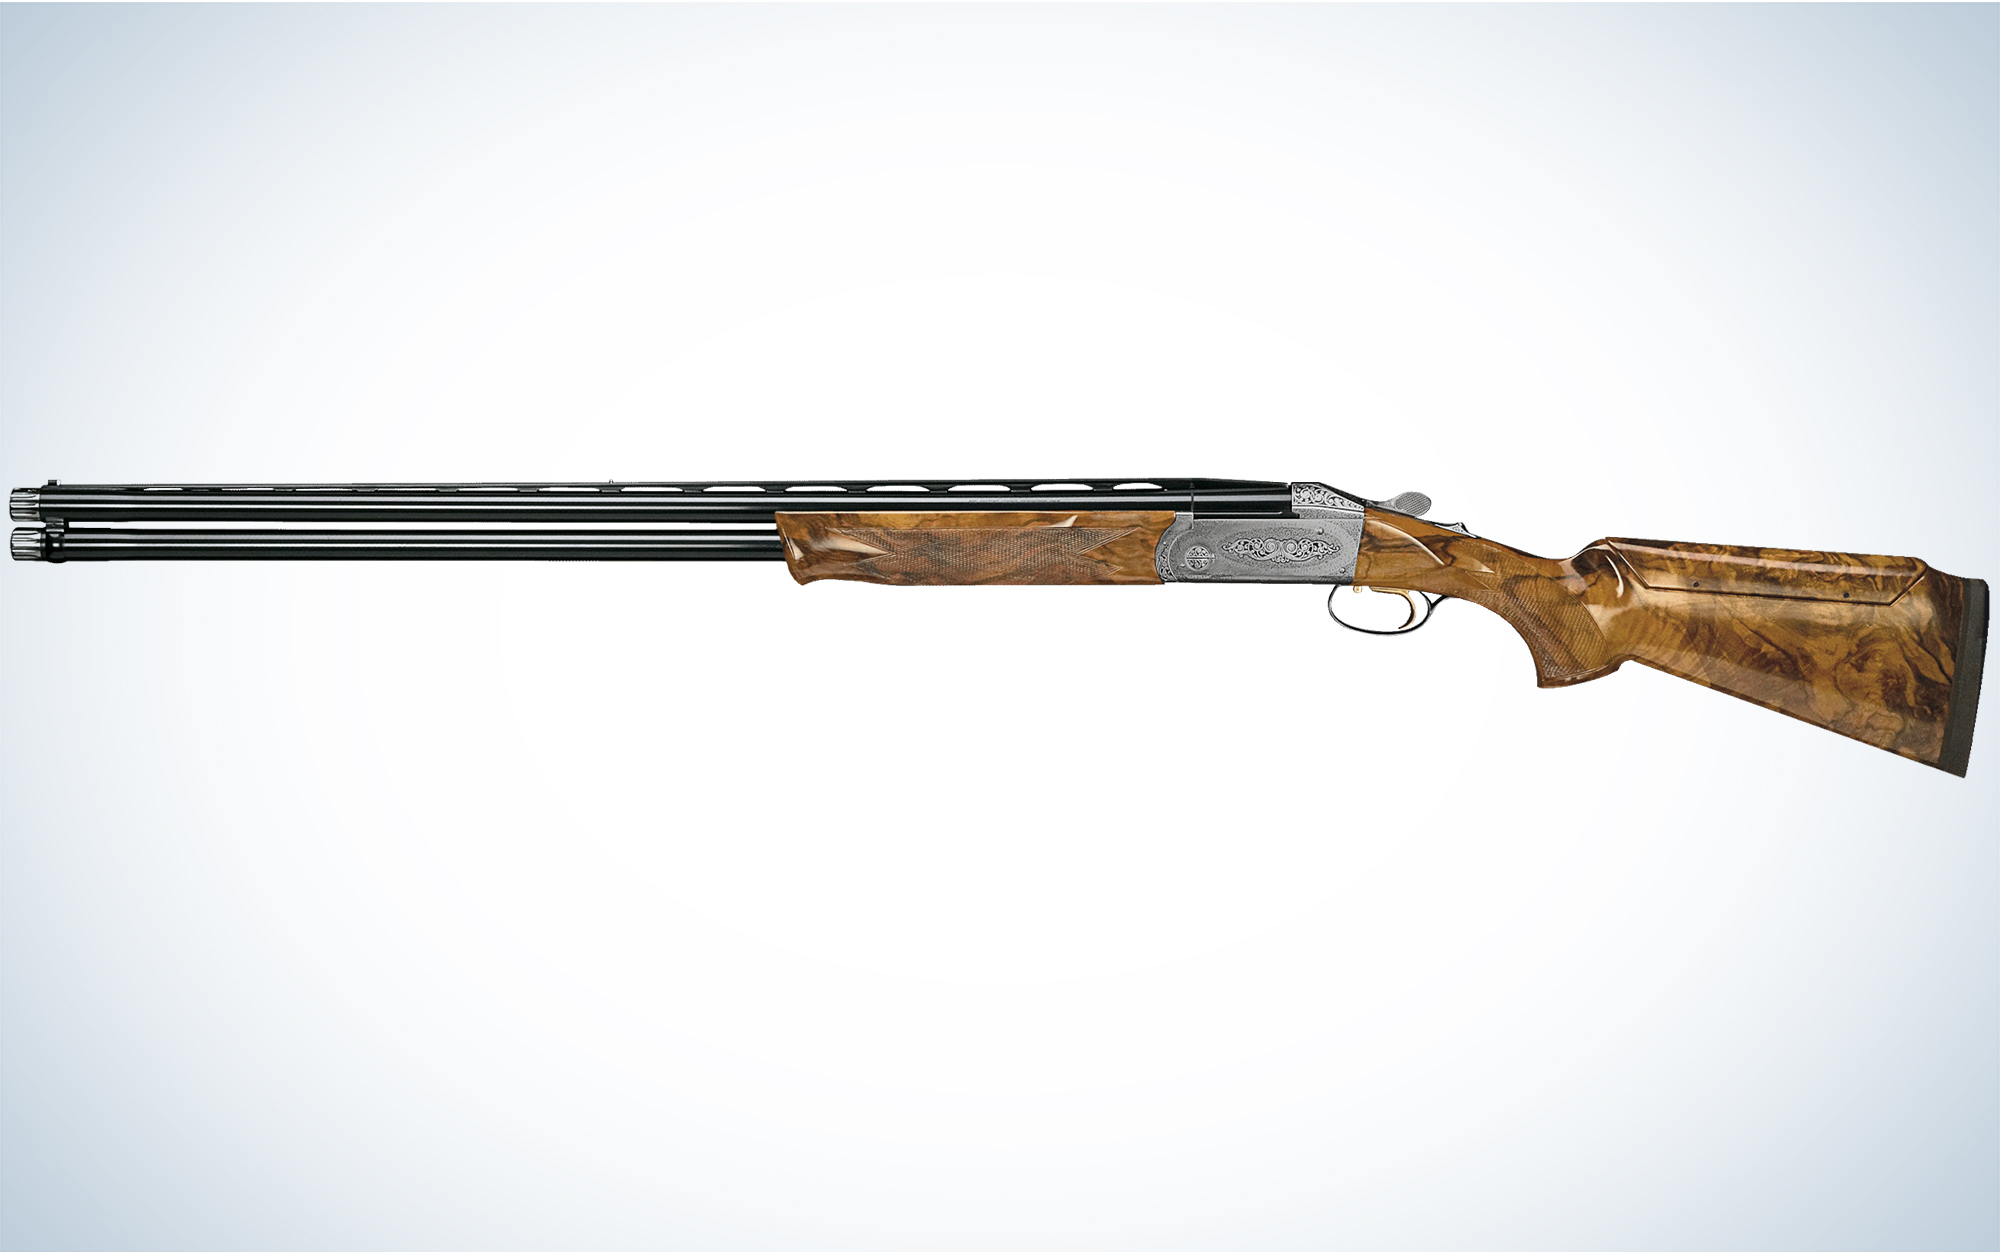 The Krieghoff K-80 Pro Sporter is one of the best over/under shotguns.